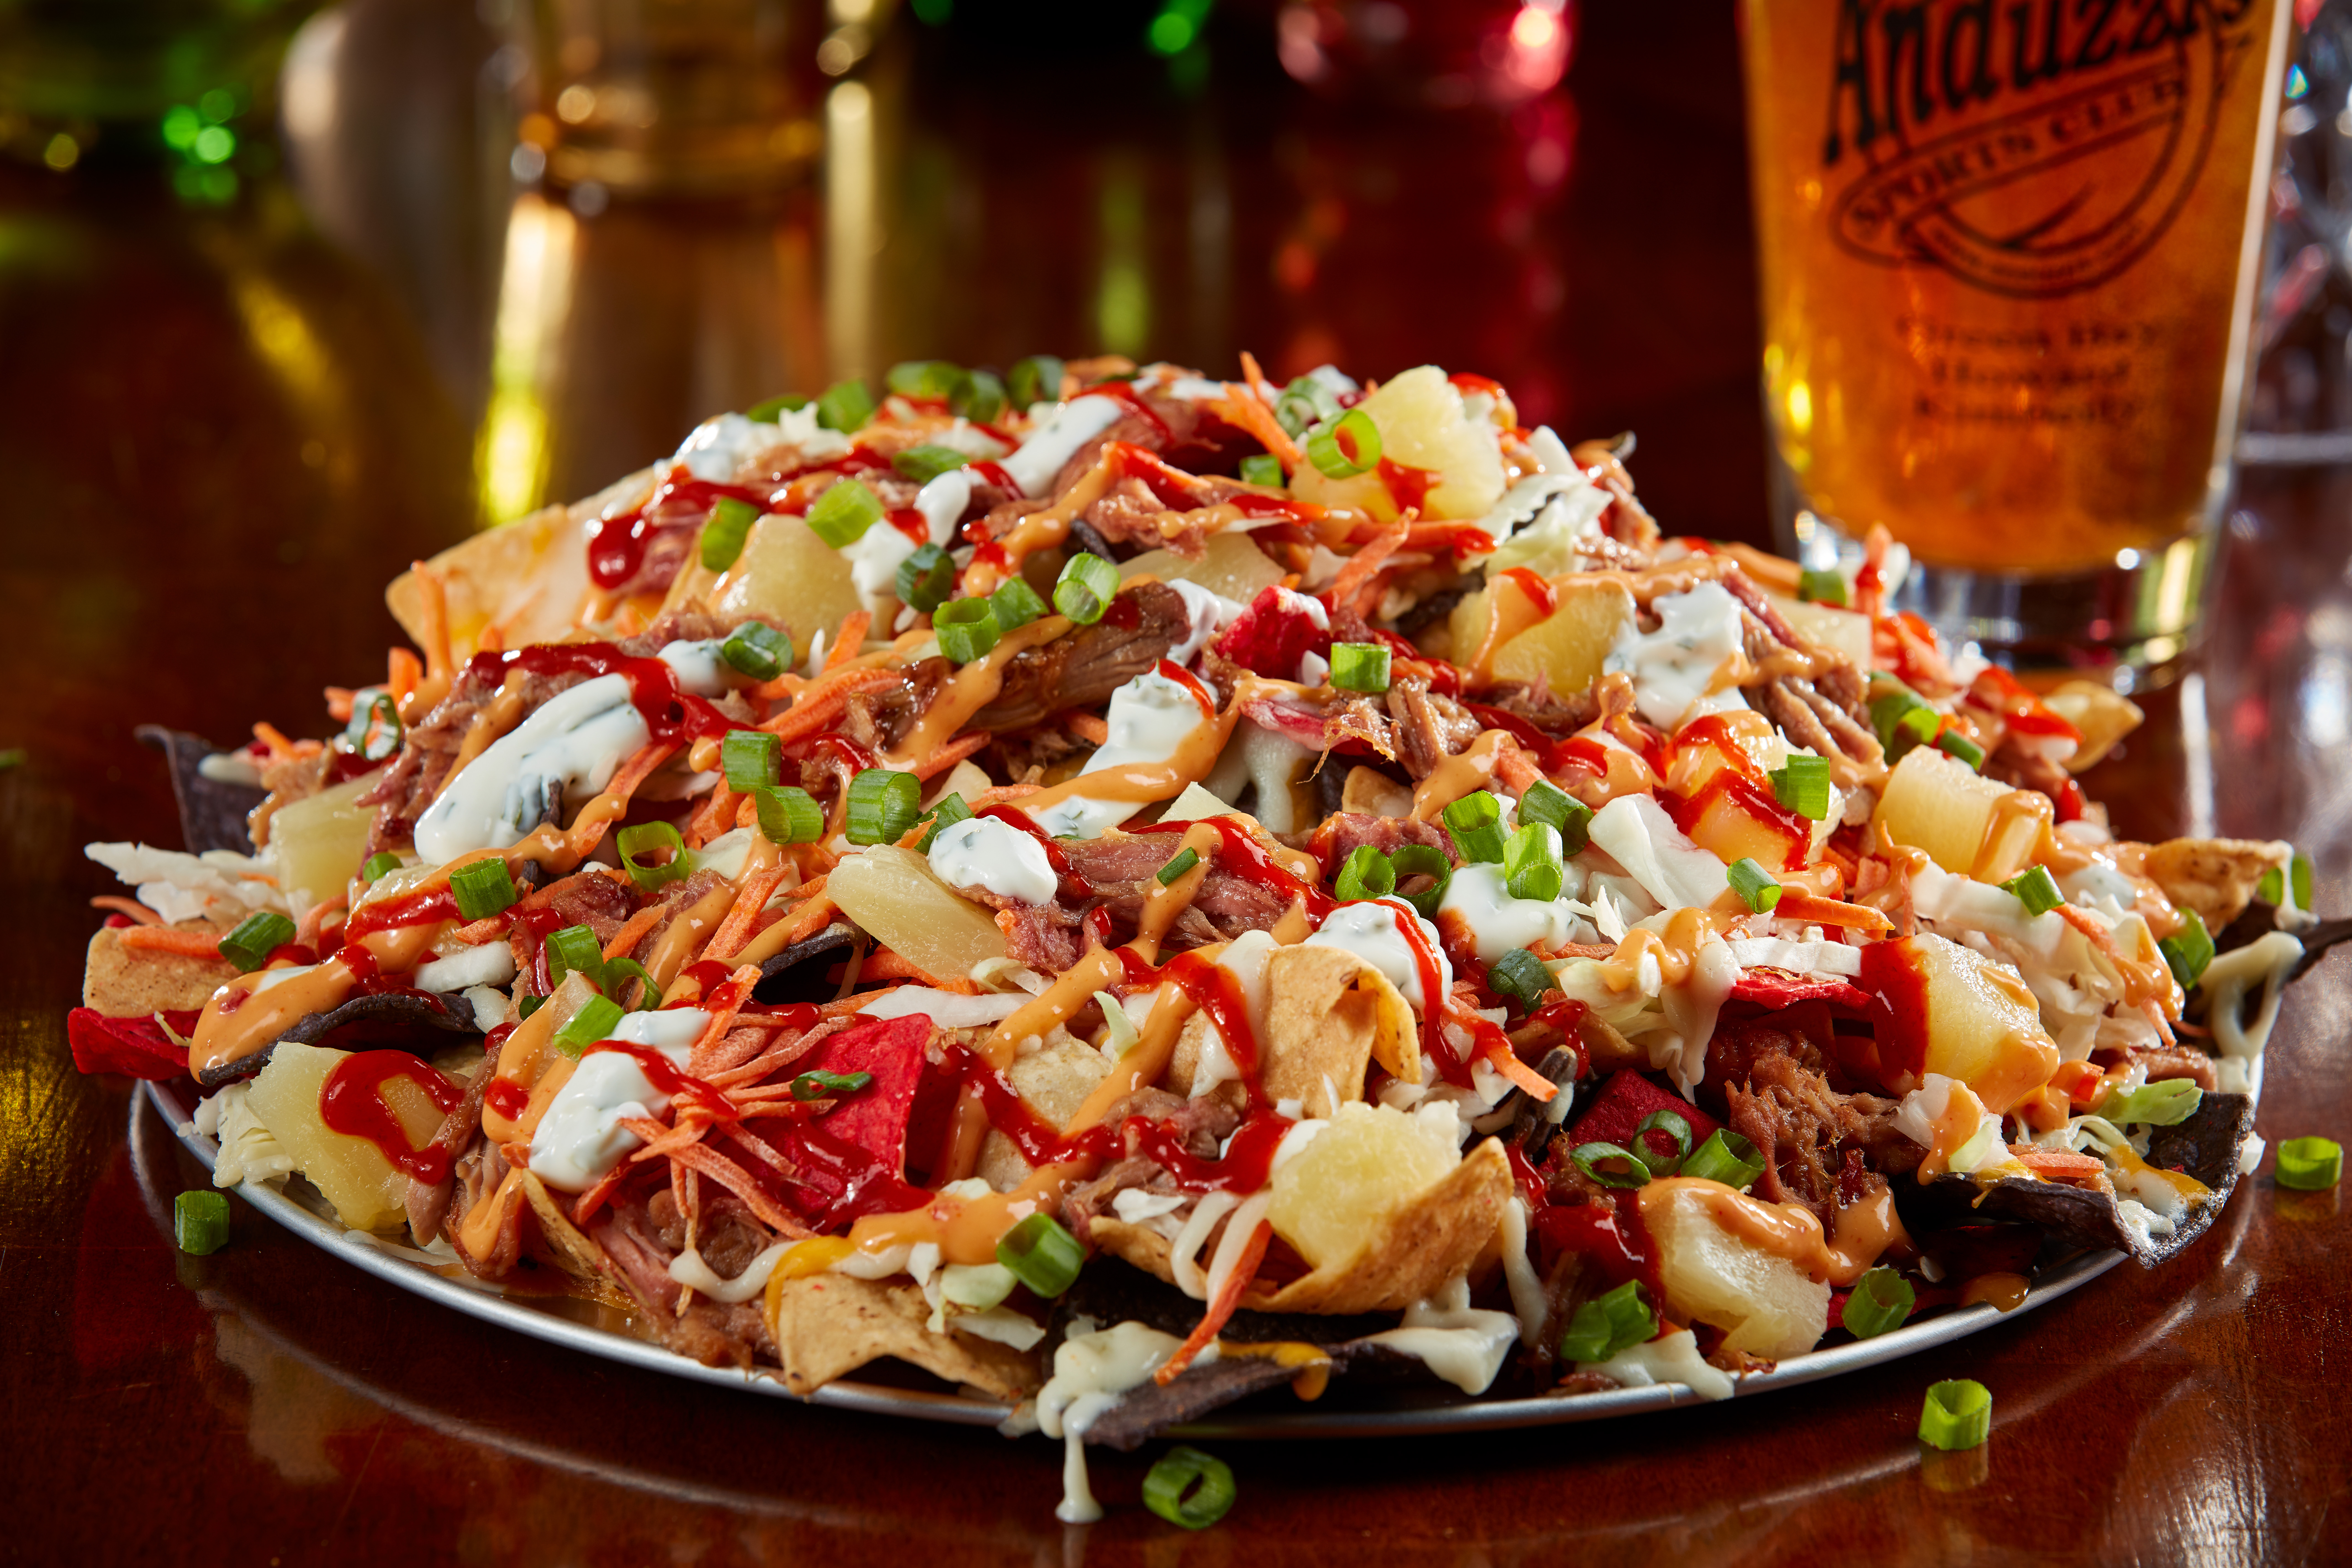 Tortilla chips topped with teriyaki pulled pork, shredded cabbage, carrots, green onion, pineapple, melted cheese and drizzled with cilantro lime sour cream, bang-bang sauce and Sriracha. $18.99